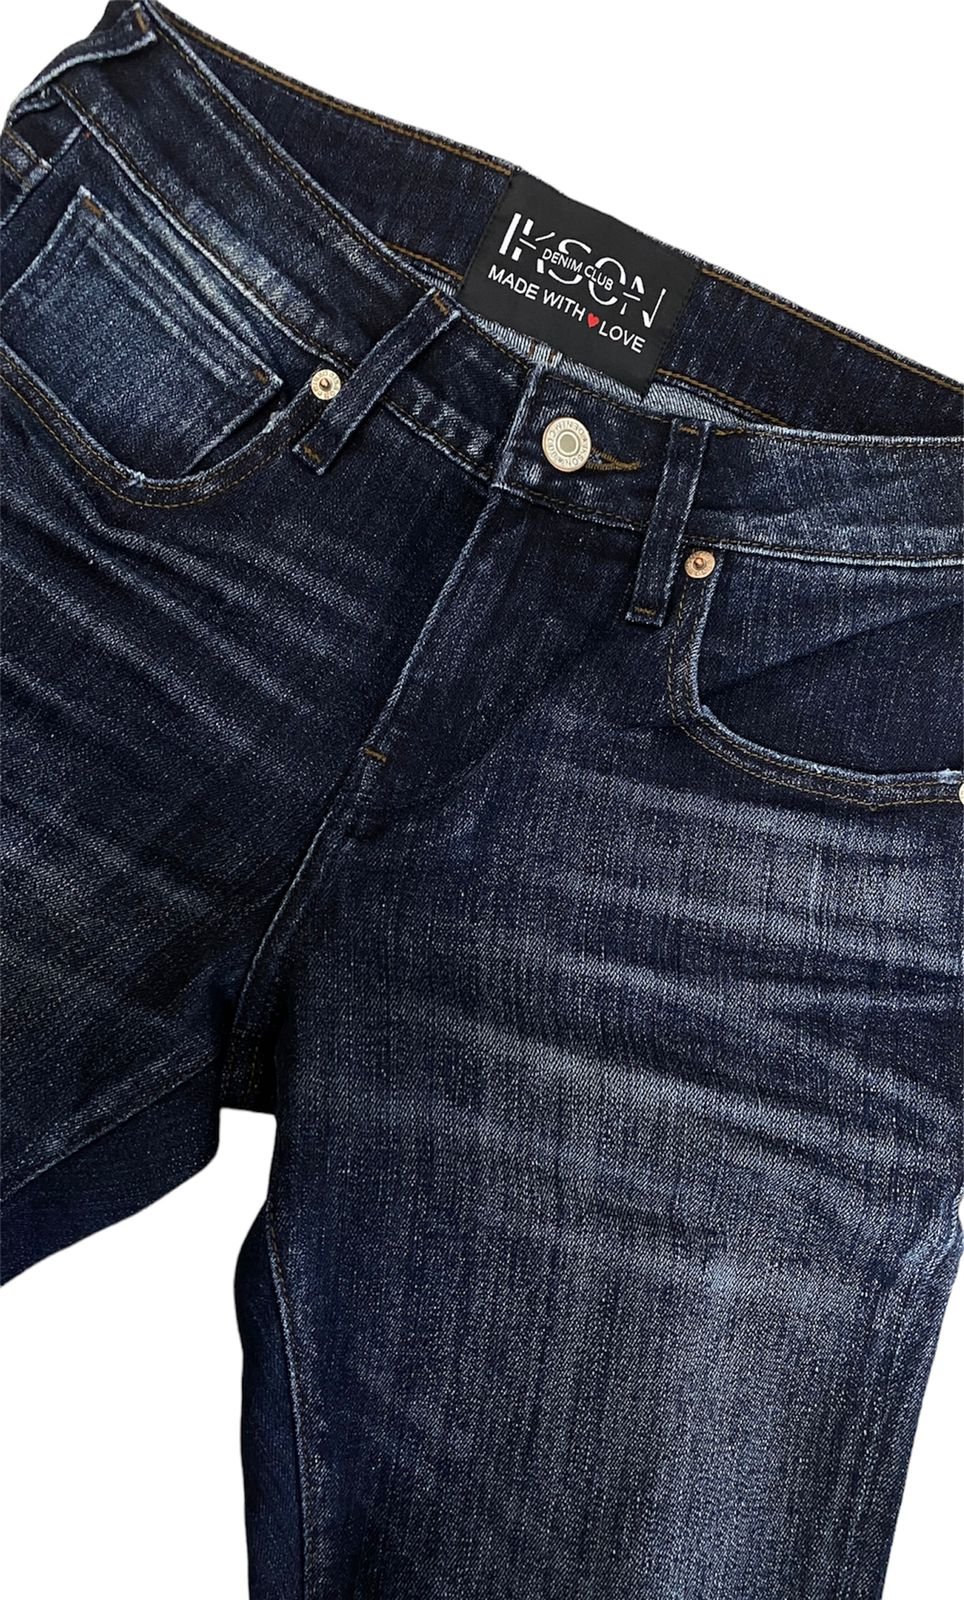 Stylish Mens Blue Denim Jeans by Beverly Hills Polo Club